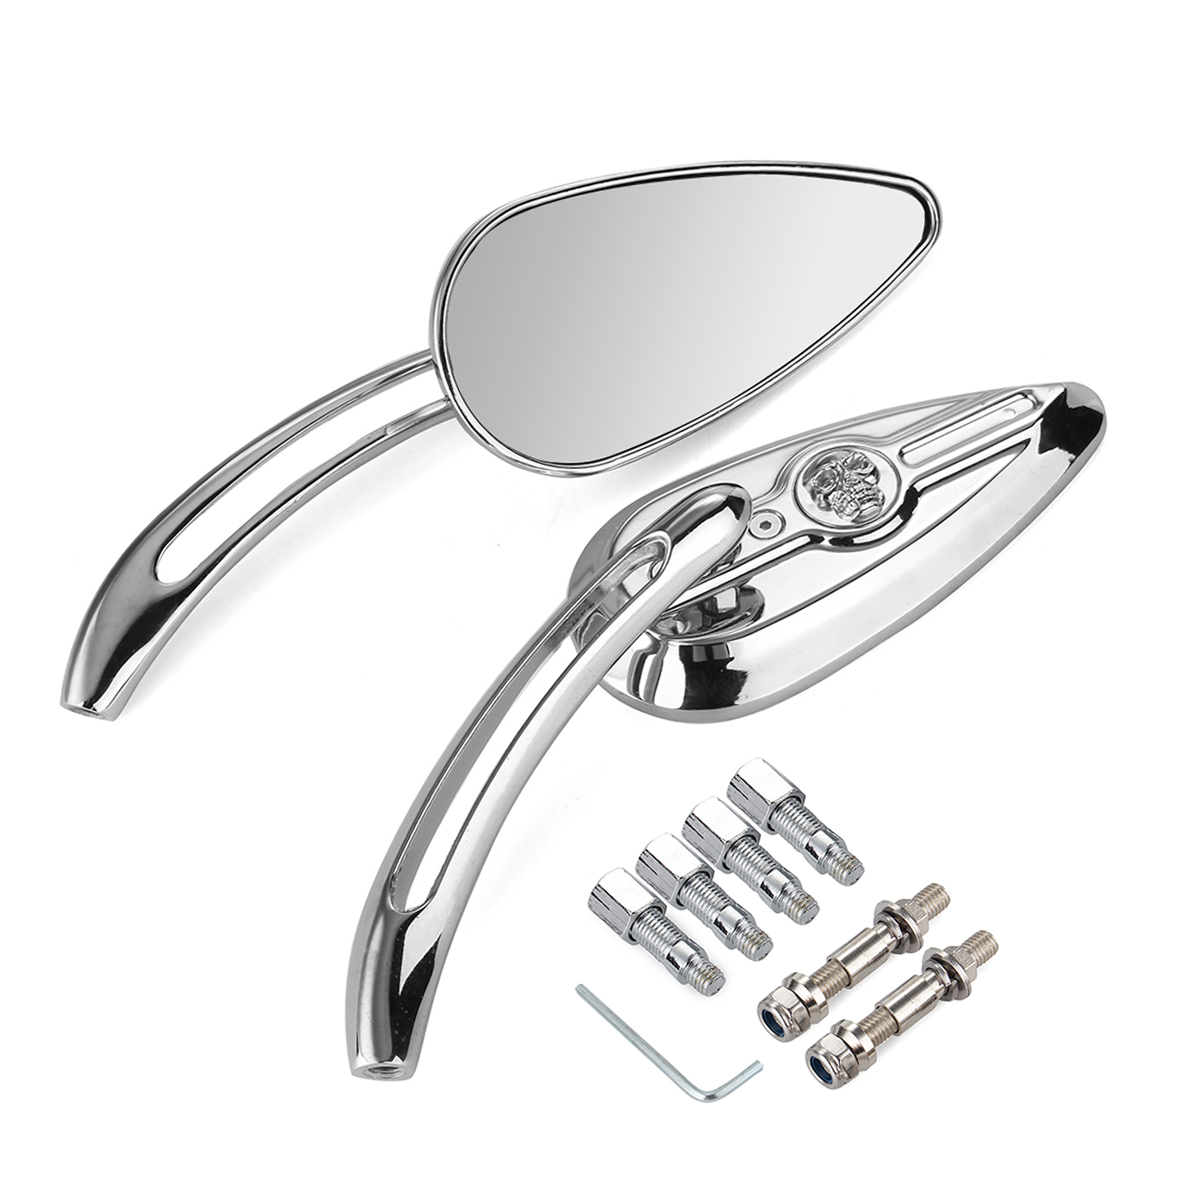 

Motorcycle Chrome Skull Teardrop Rearview Mirrors For Harley Dyna Electra Glide